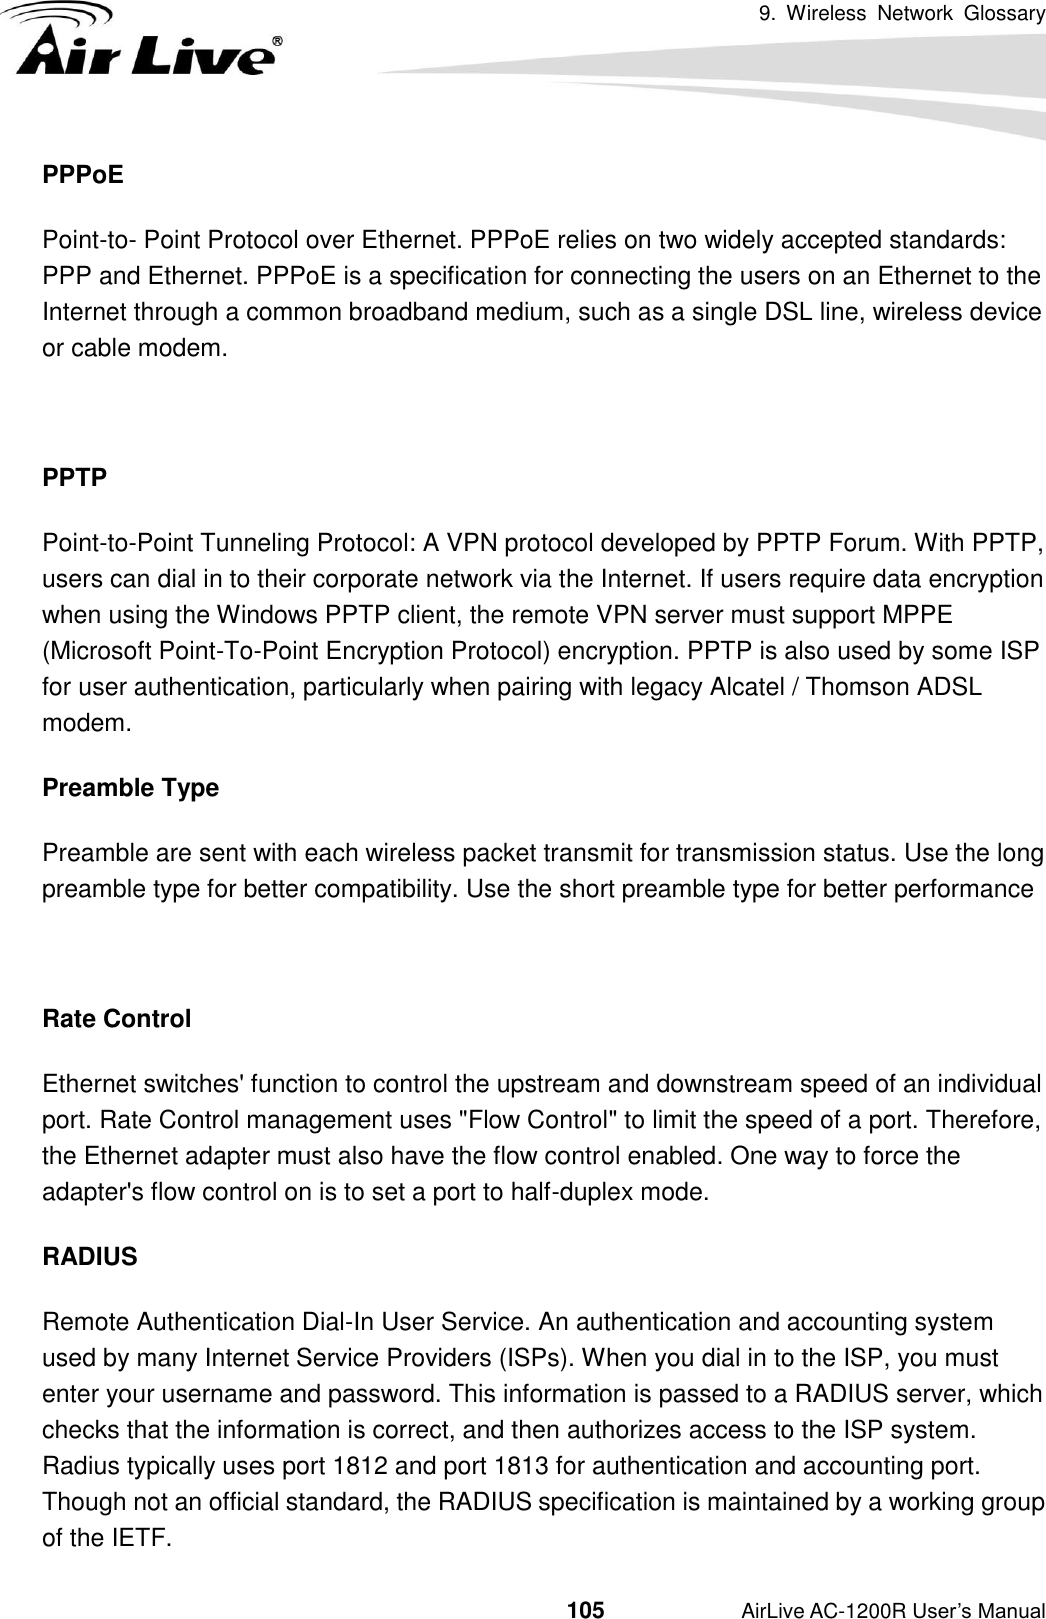 9.  Wireless  Network  Glossary                                          105           AirLive AC-1200R User’s Manual PPPoE Point-to- Point Protocol over Ethernet. PPPoE relies on two widely accepted standards: PPP and Ethernet. PPPoE is a specification for connecting the users on an Ethernet to the Internet through a common broadband medium, such as a single DSL line, wireless device or cable modem.    PPTP Point-to-Point Tunneling Protocol: A VPN protocol developed by PPTP Forum. With PPTP, users can dial in to their corporate network via the Internet. If users require data encryption when using the Windows PPTP client, the remote VPN server must support MPPE (Microsoft Point-To-Point Encryption Protocol) encryption. PPTP is also used by some ISP for user authentication, particularly when pairing with legacy Alcatel / Thomson ADSL modem. Preamble Type Preamble are sent with each wireless packet transmit for transmission status. Use the long preamble type for better compatibility. Use the short preamble type for better performance  Rate Control Ethernet switches&apos; function to control the upstream and downstream speed of an individual port. Rate Control management uses &quot;Flow Control&quot; to limit the speed of a port. Therefore, the Ethernet adapter must also have the flow control enabled. One way to force the adapter&apos;s flow control on is to set a port to half-duplex mode. RADIUS Remote Authentication Dial-In User Service. An authentication and accounting system used by many Internet Service Providers (ISPs). When you dial in to the ISP, you must enter your username and password. This information is passed to a RADIUS server, which checks that the information is correct, and then authorizes access to the ISP system. Radius typically uses port 1812 and port 1813 for authentication and accounting port.   Though not an official standard, the RADIUS specification is maintained by a working group of the IETF. 